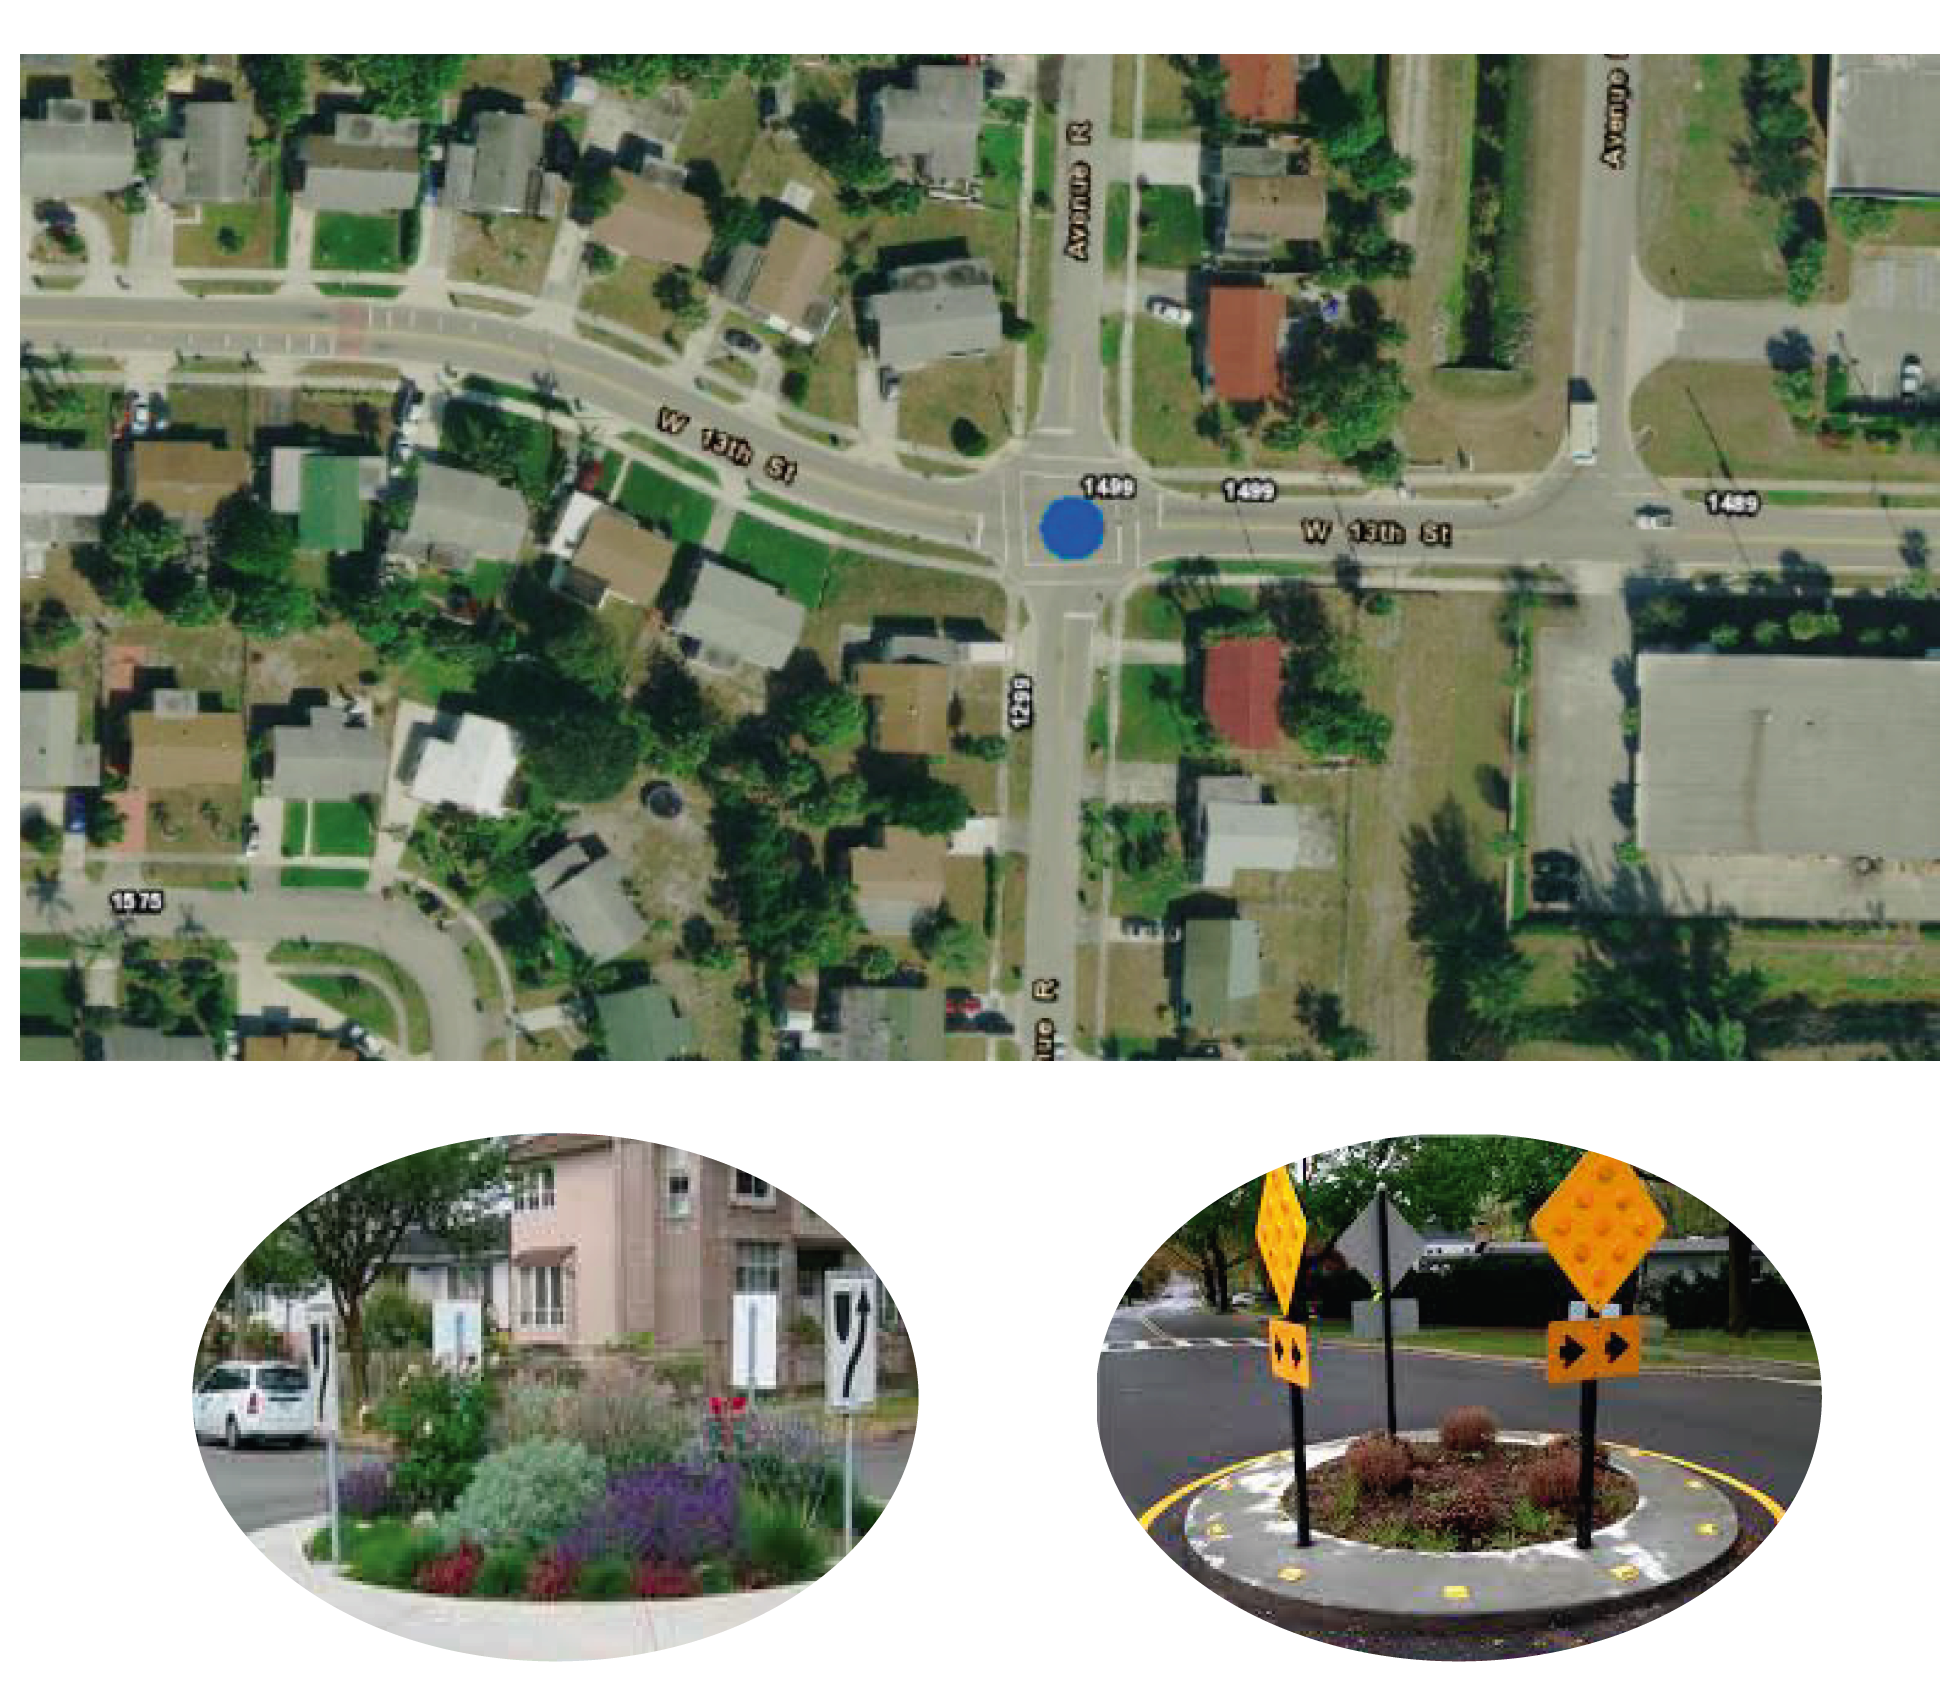 Option 2: Traffic Circles- Circular intersection where traffic flows in one direction around a central island. Spees can be reduced by 5 mph. The image below shows the potential location of the traffic circle at the intersection of 13th and Avenue R